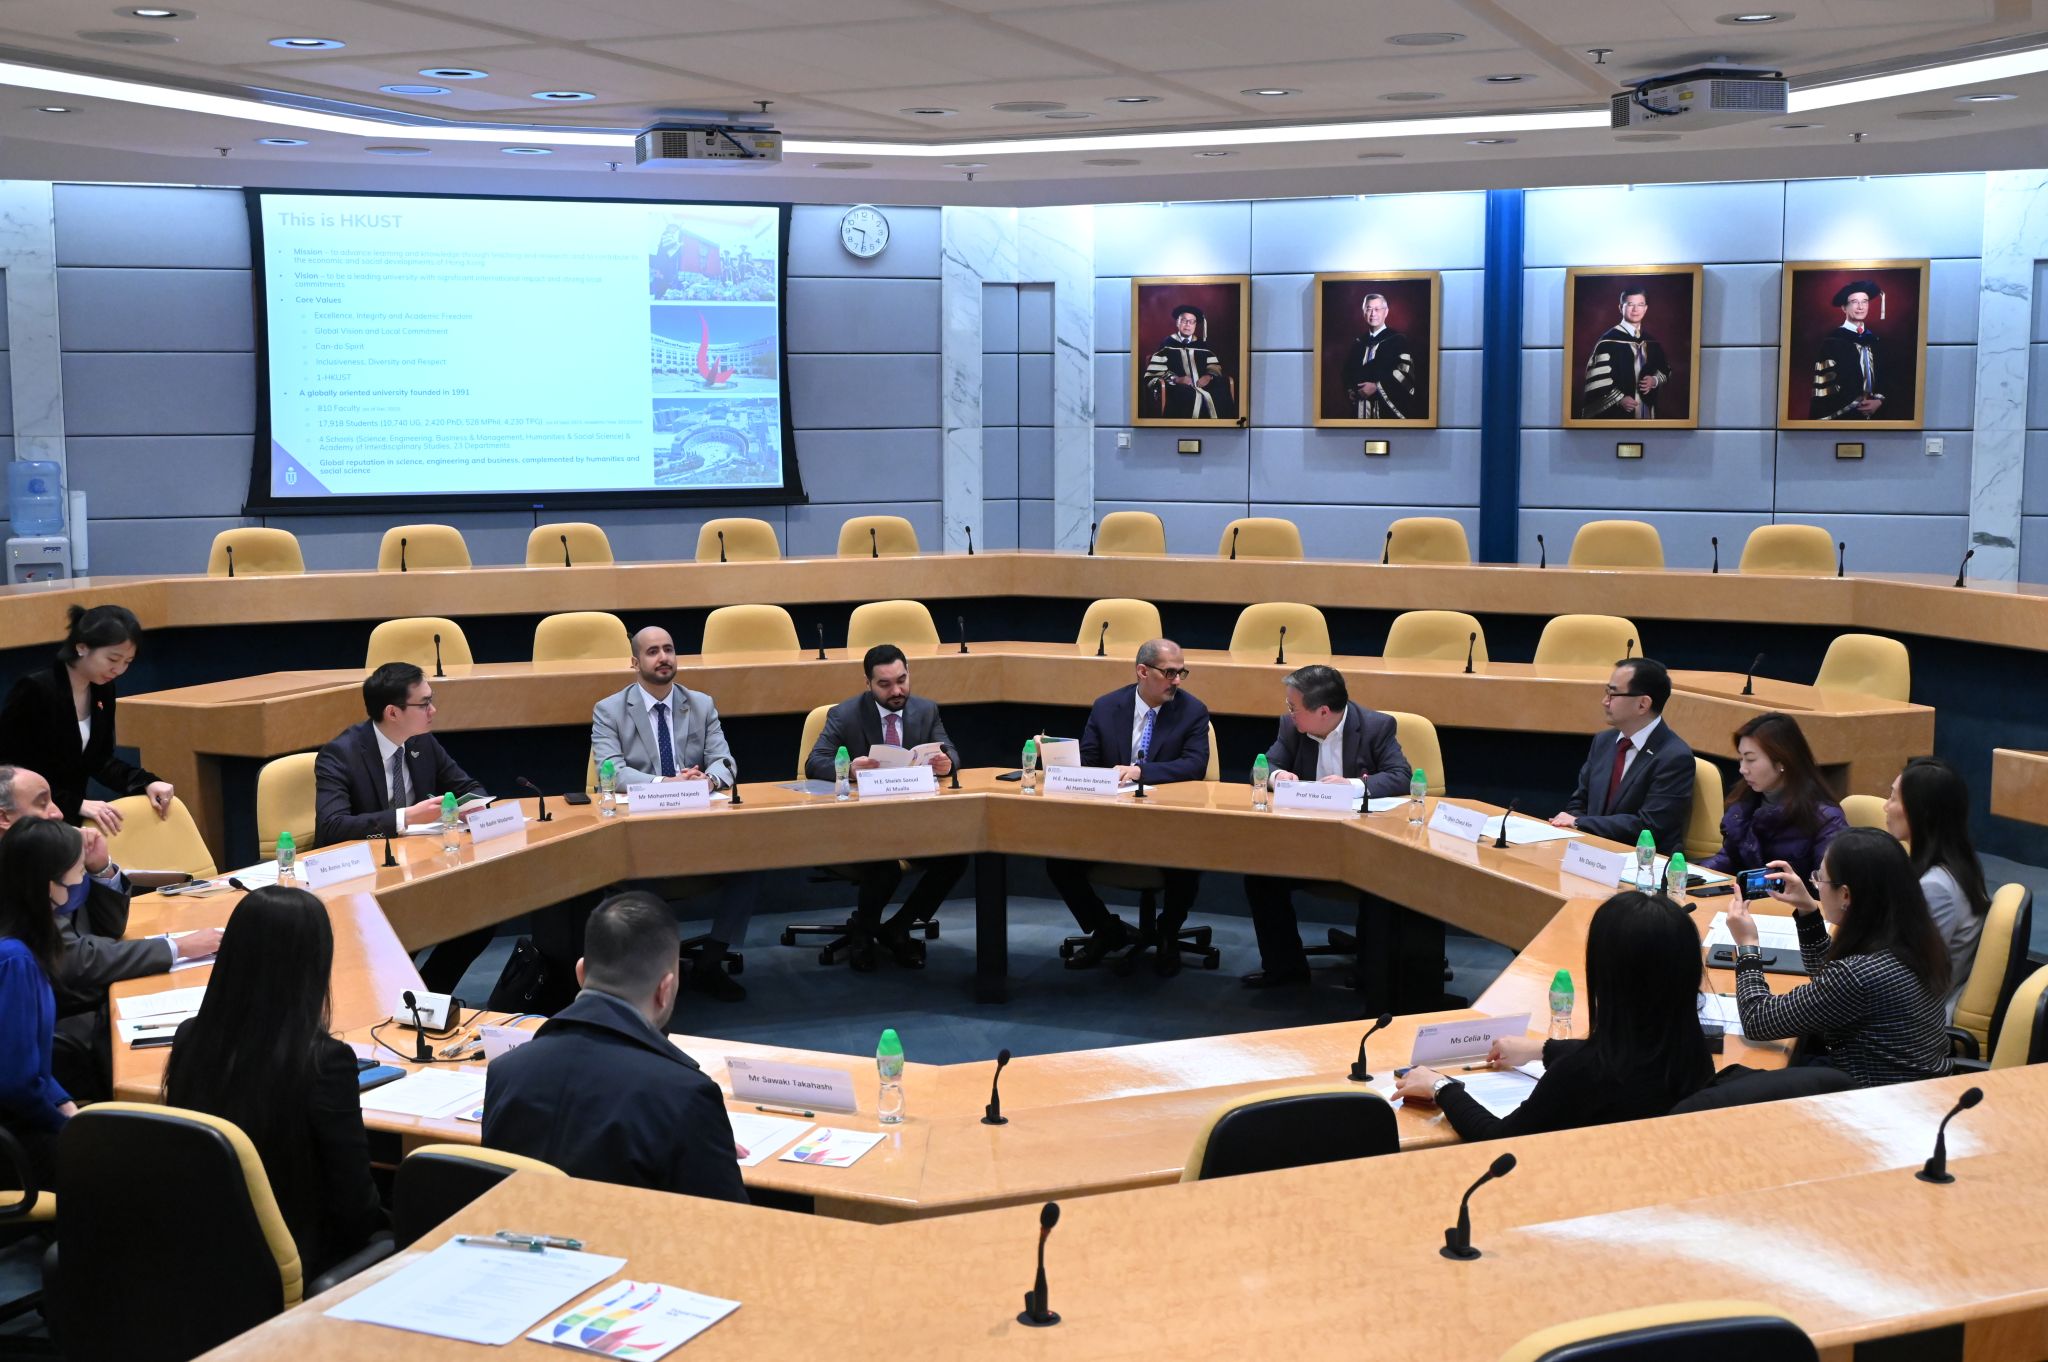 The UAE delegation had a meeting with HKUST Provost Prof. GUO Yike and other senior leaders to explore opportunities to enhance collaboration and foster stronger bonds between the UAE and HKUST.